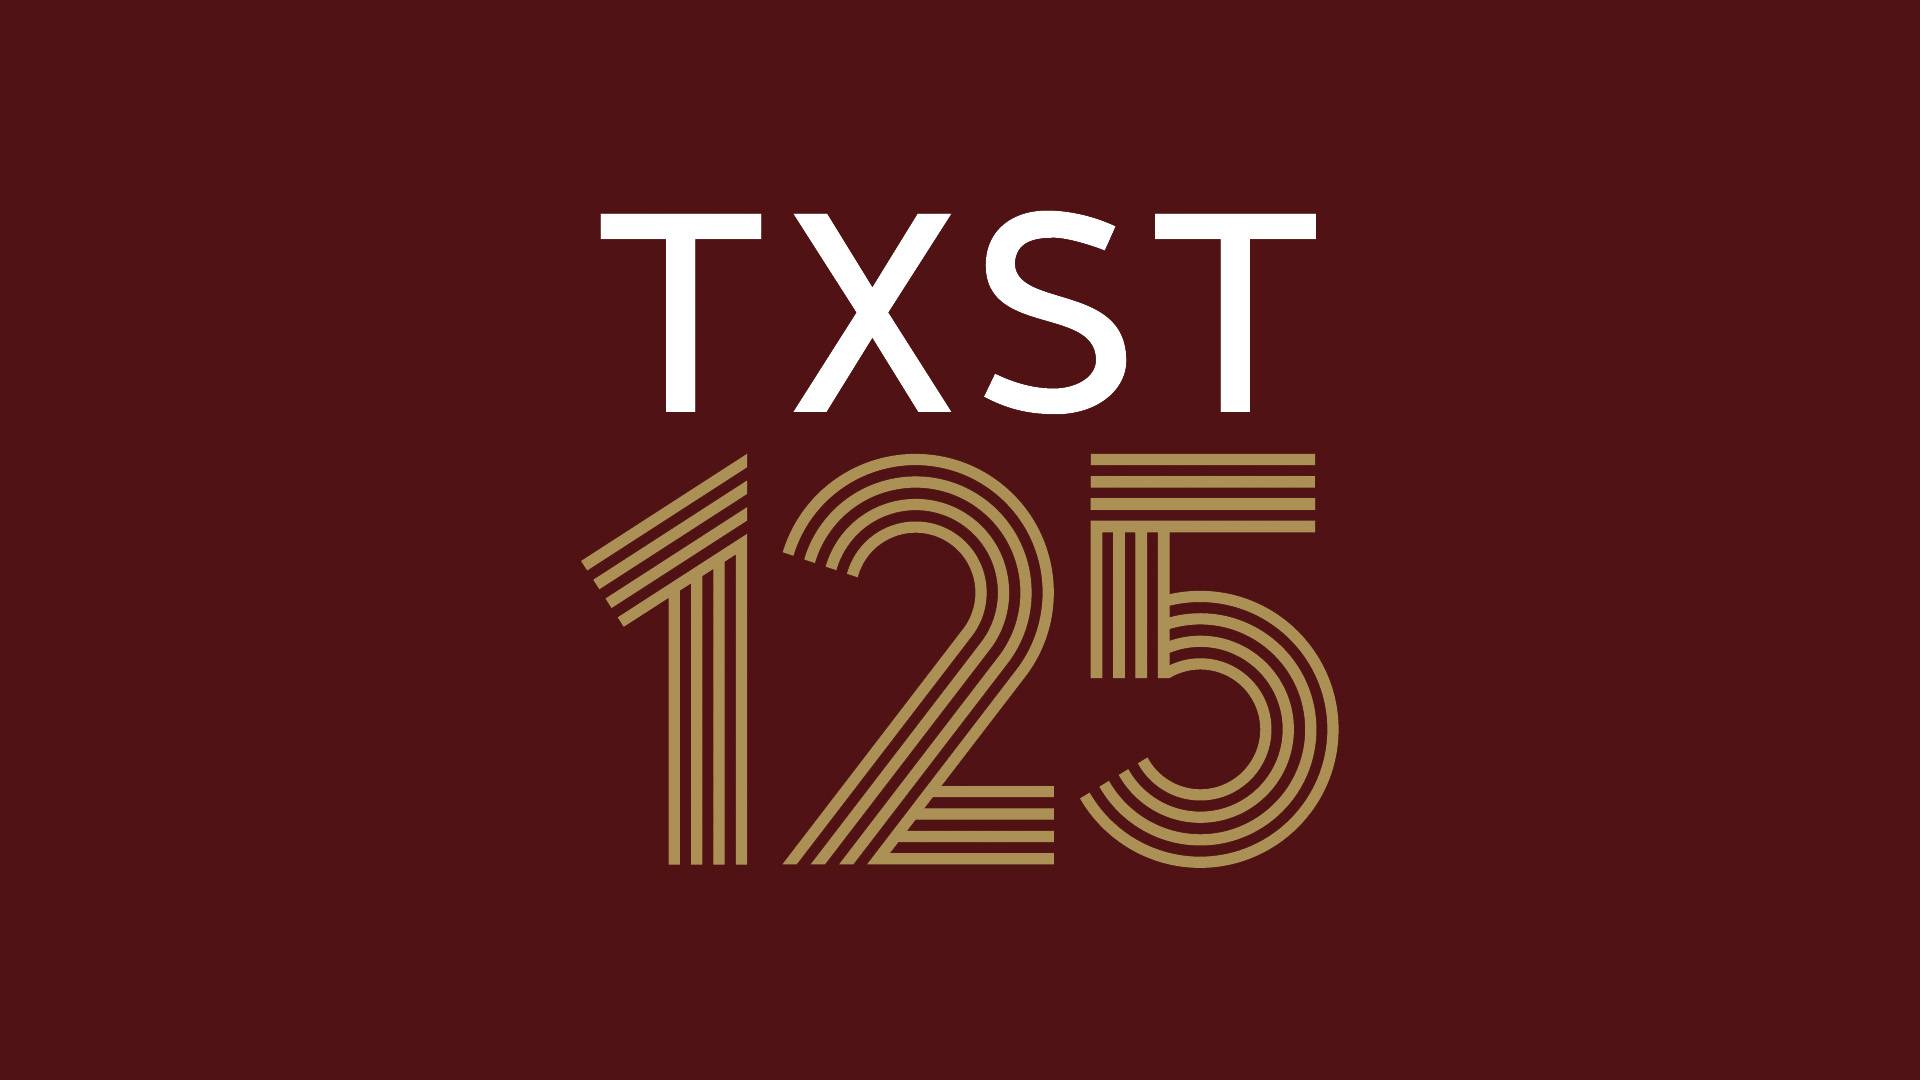 Maroon graphic with text TXST 125